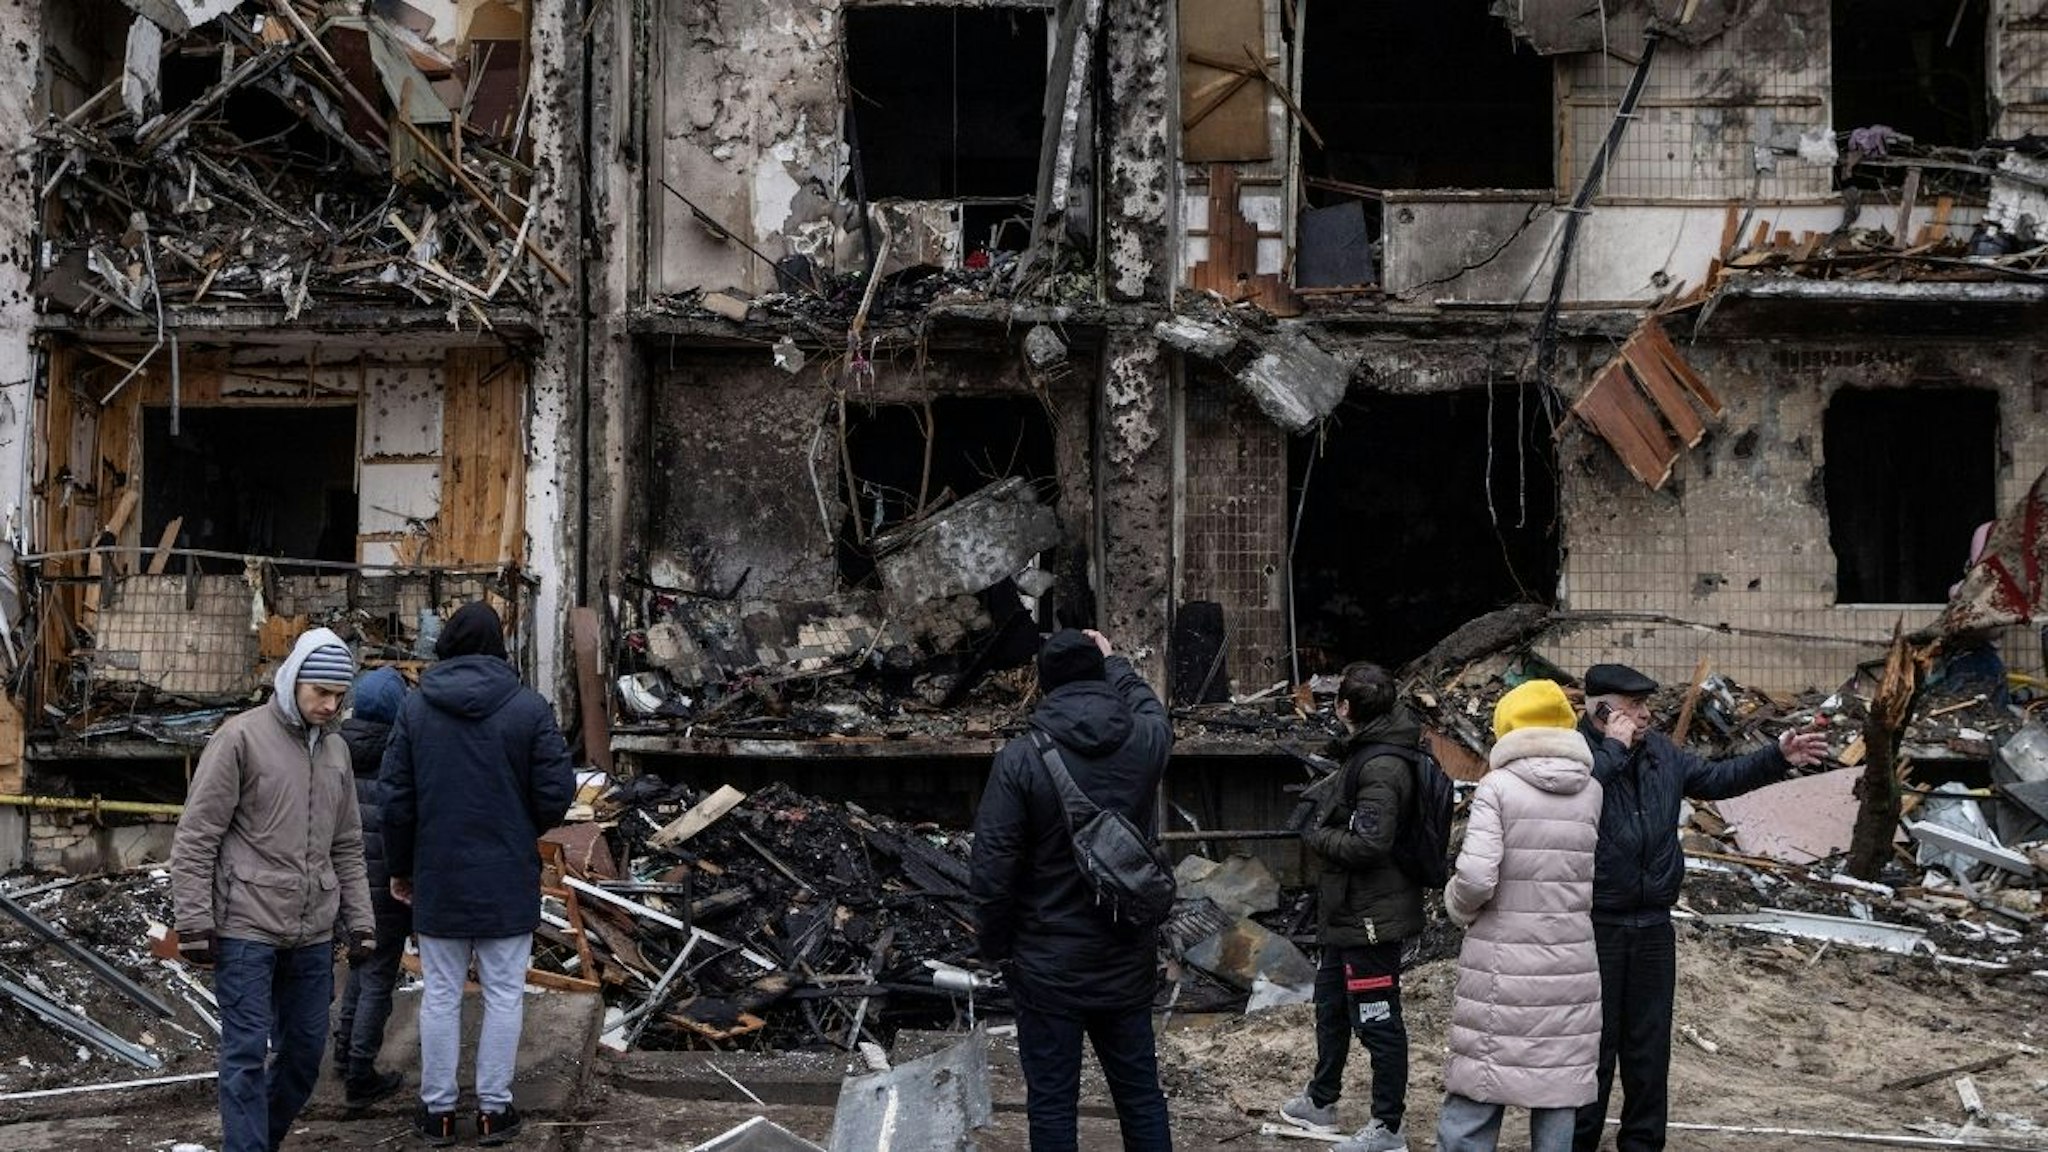 People look at the exterior of a damaged residential block hit by an early morning missile strike on February 25, 2022 in Kyiv, Ukraine. Yesterday, Russia began a large-scale attack on Ukraine, with Russian troops invading the country from the north, east and south, accompanied by air strikes and shelling.